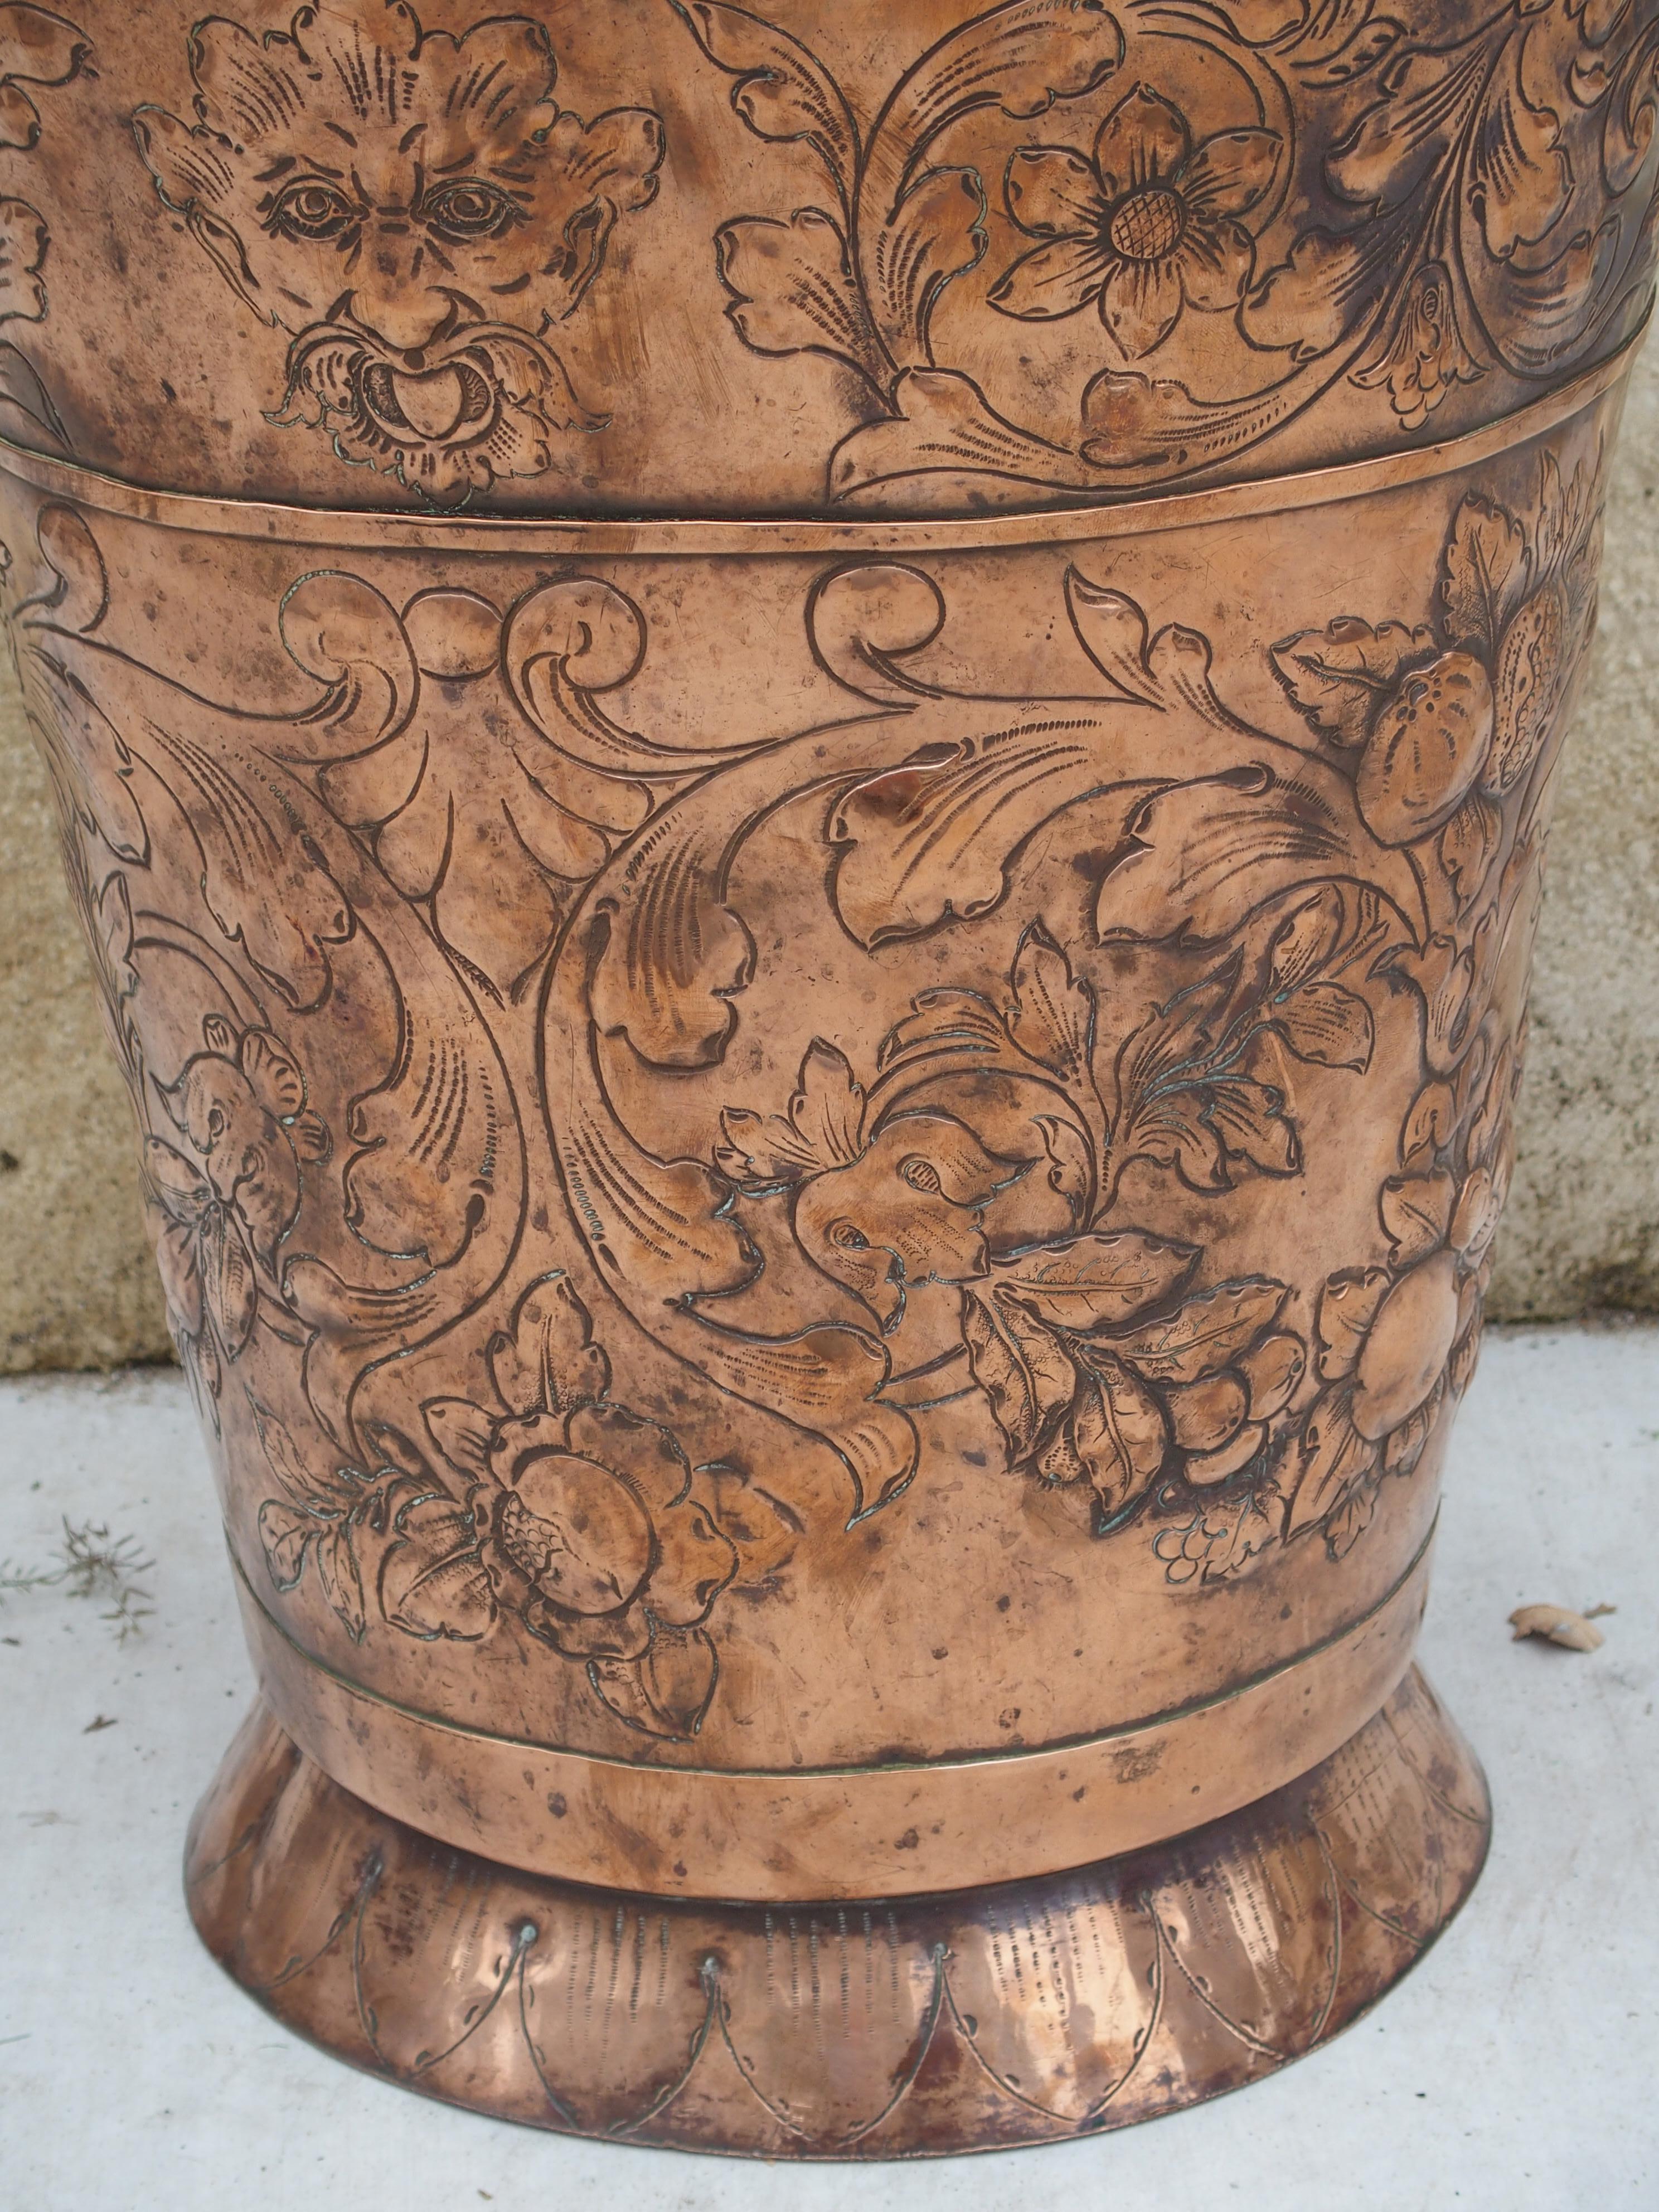 French 18th Century Ceremonial Copper Wine Hotte from Alsace, France